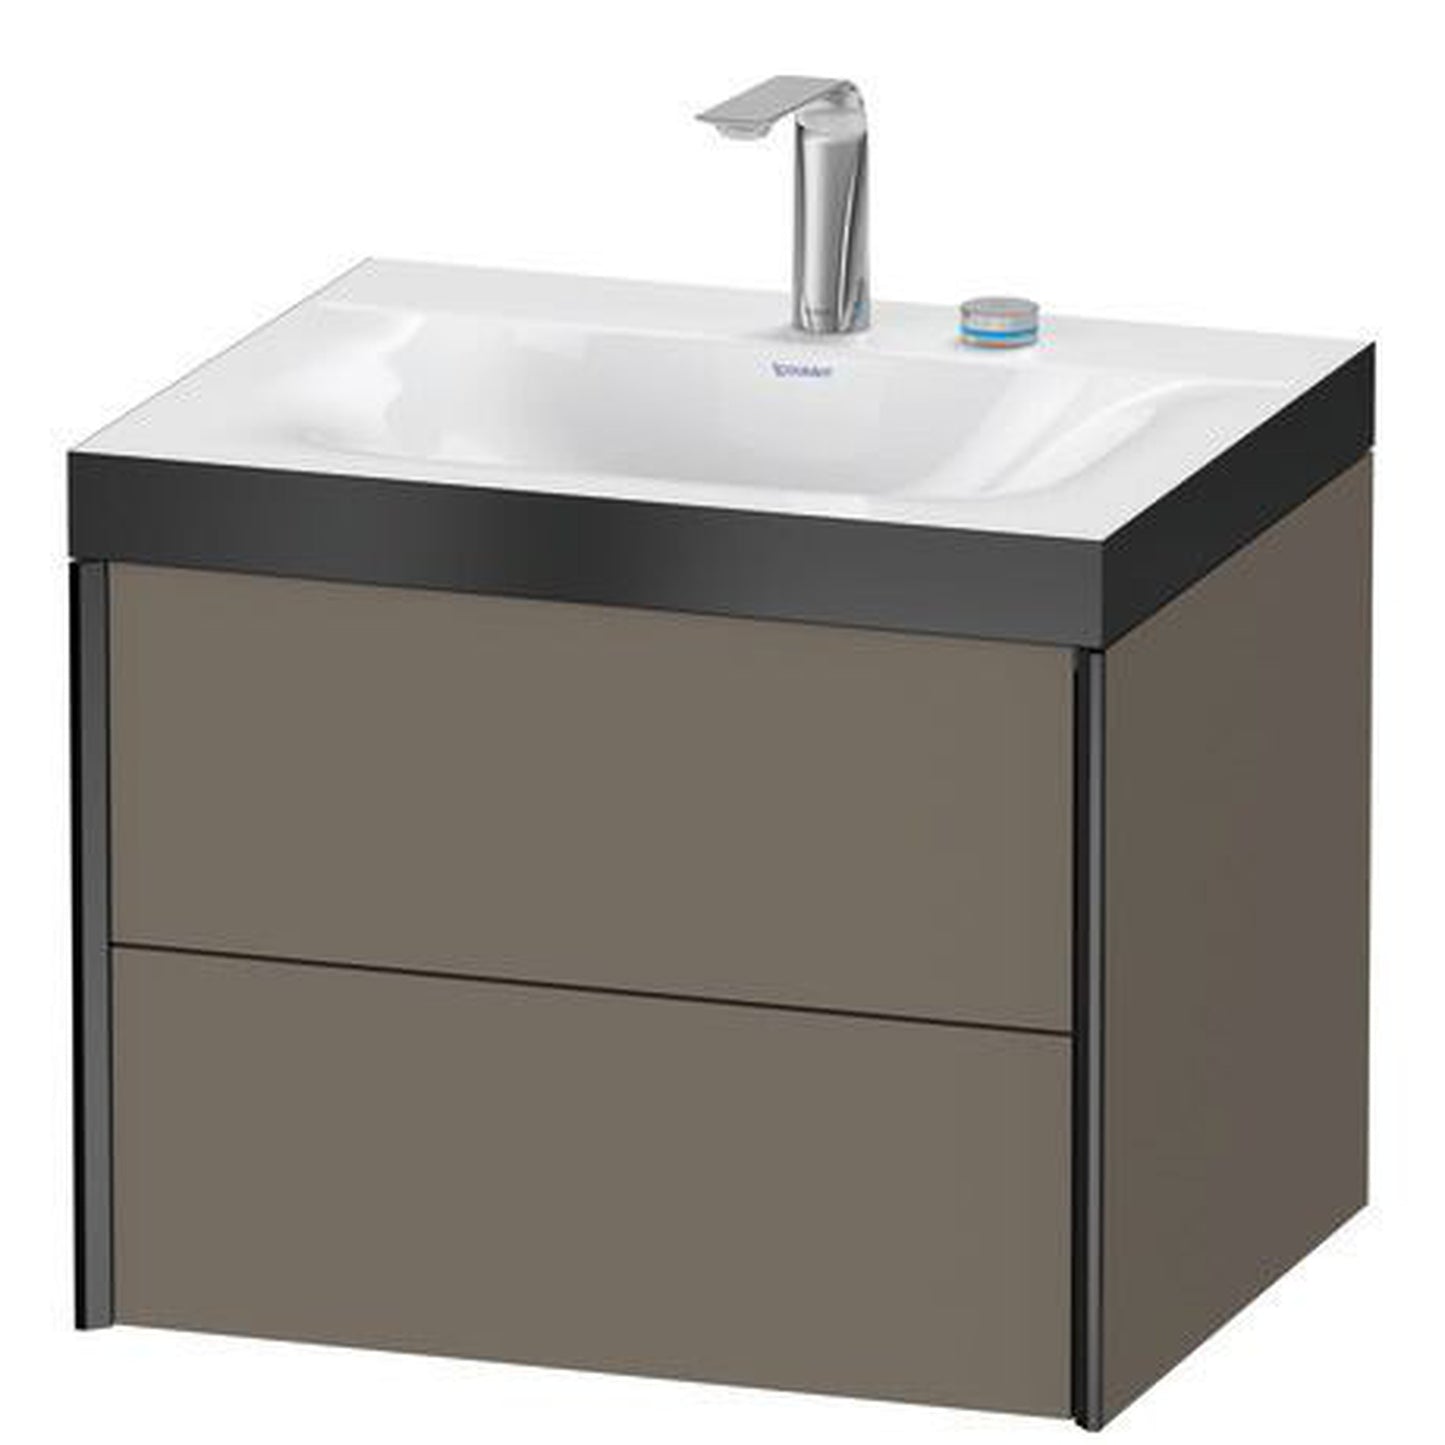 Duravit Xviu 24" x 20" x 19" Two Drawer C-Bonded Wall-Mount Vanity Kit With Two Tap Holes, Flannel Gray (XV4614EB290P)